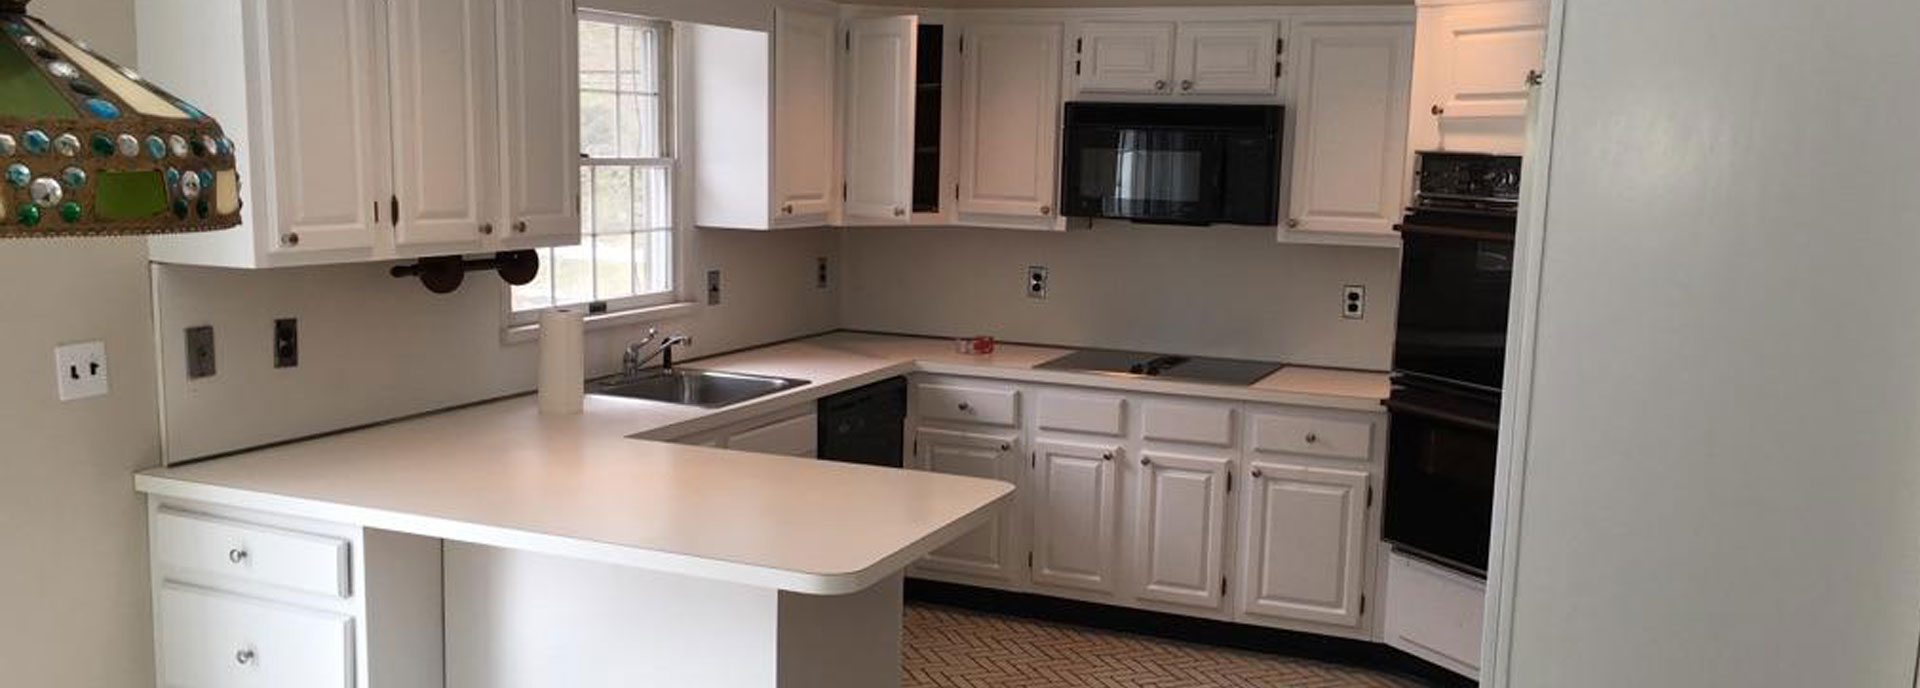 norwalk ct cabinet repainting & refinishing after